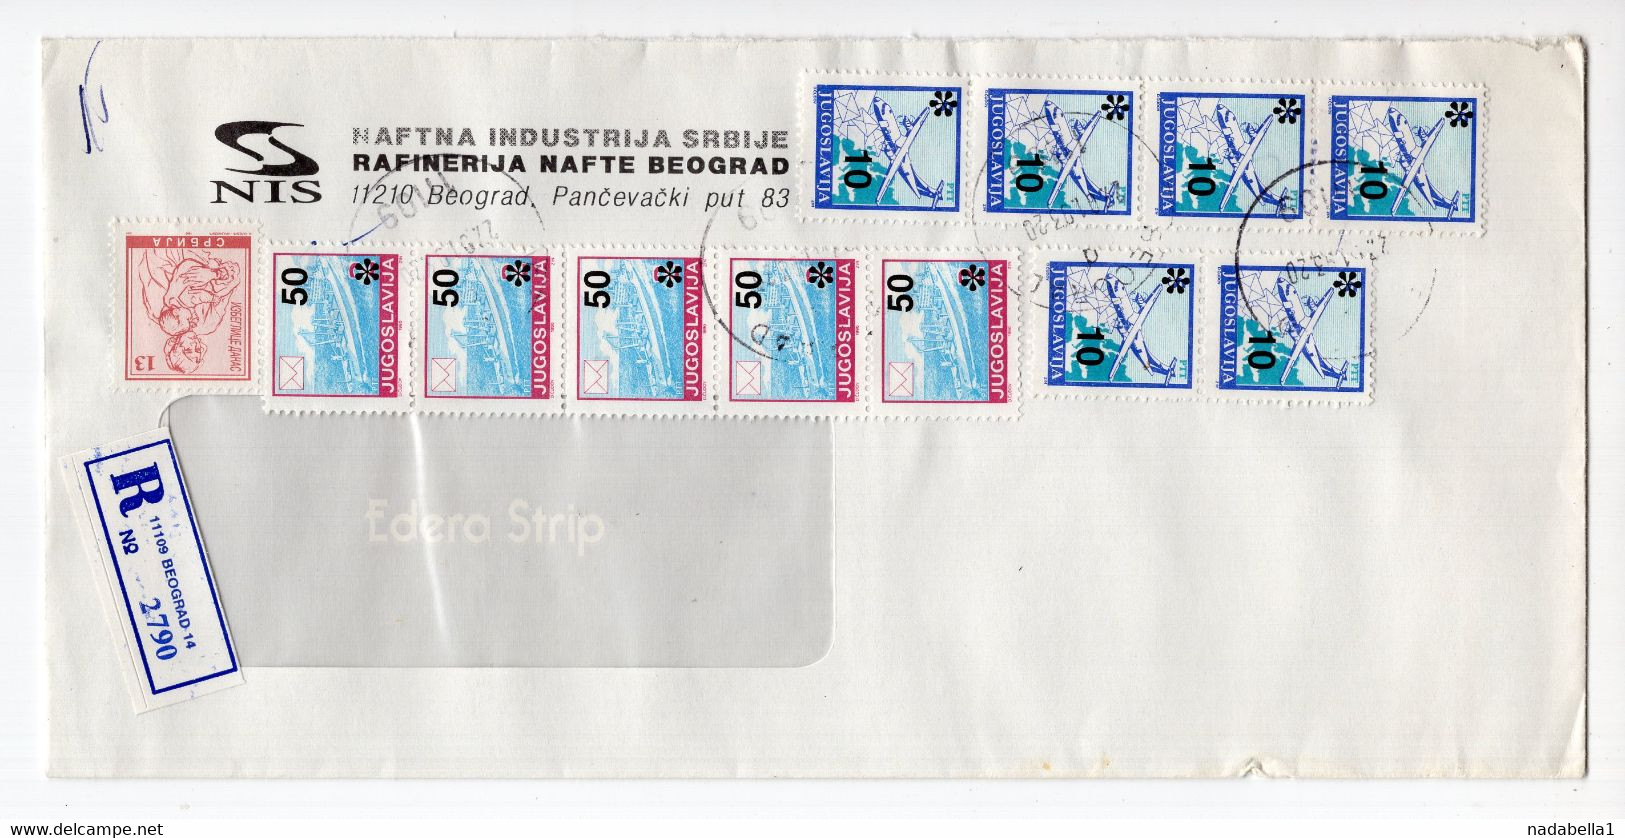 1993. YUGOSLAVIA,SERBIA,BELGRADE,REGISTERED COVER,NIS OIL REFINERY HEADED COVER - Covers & Documents